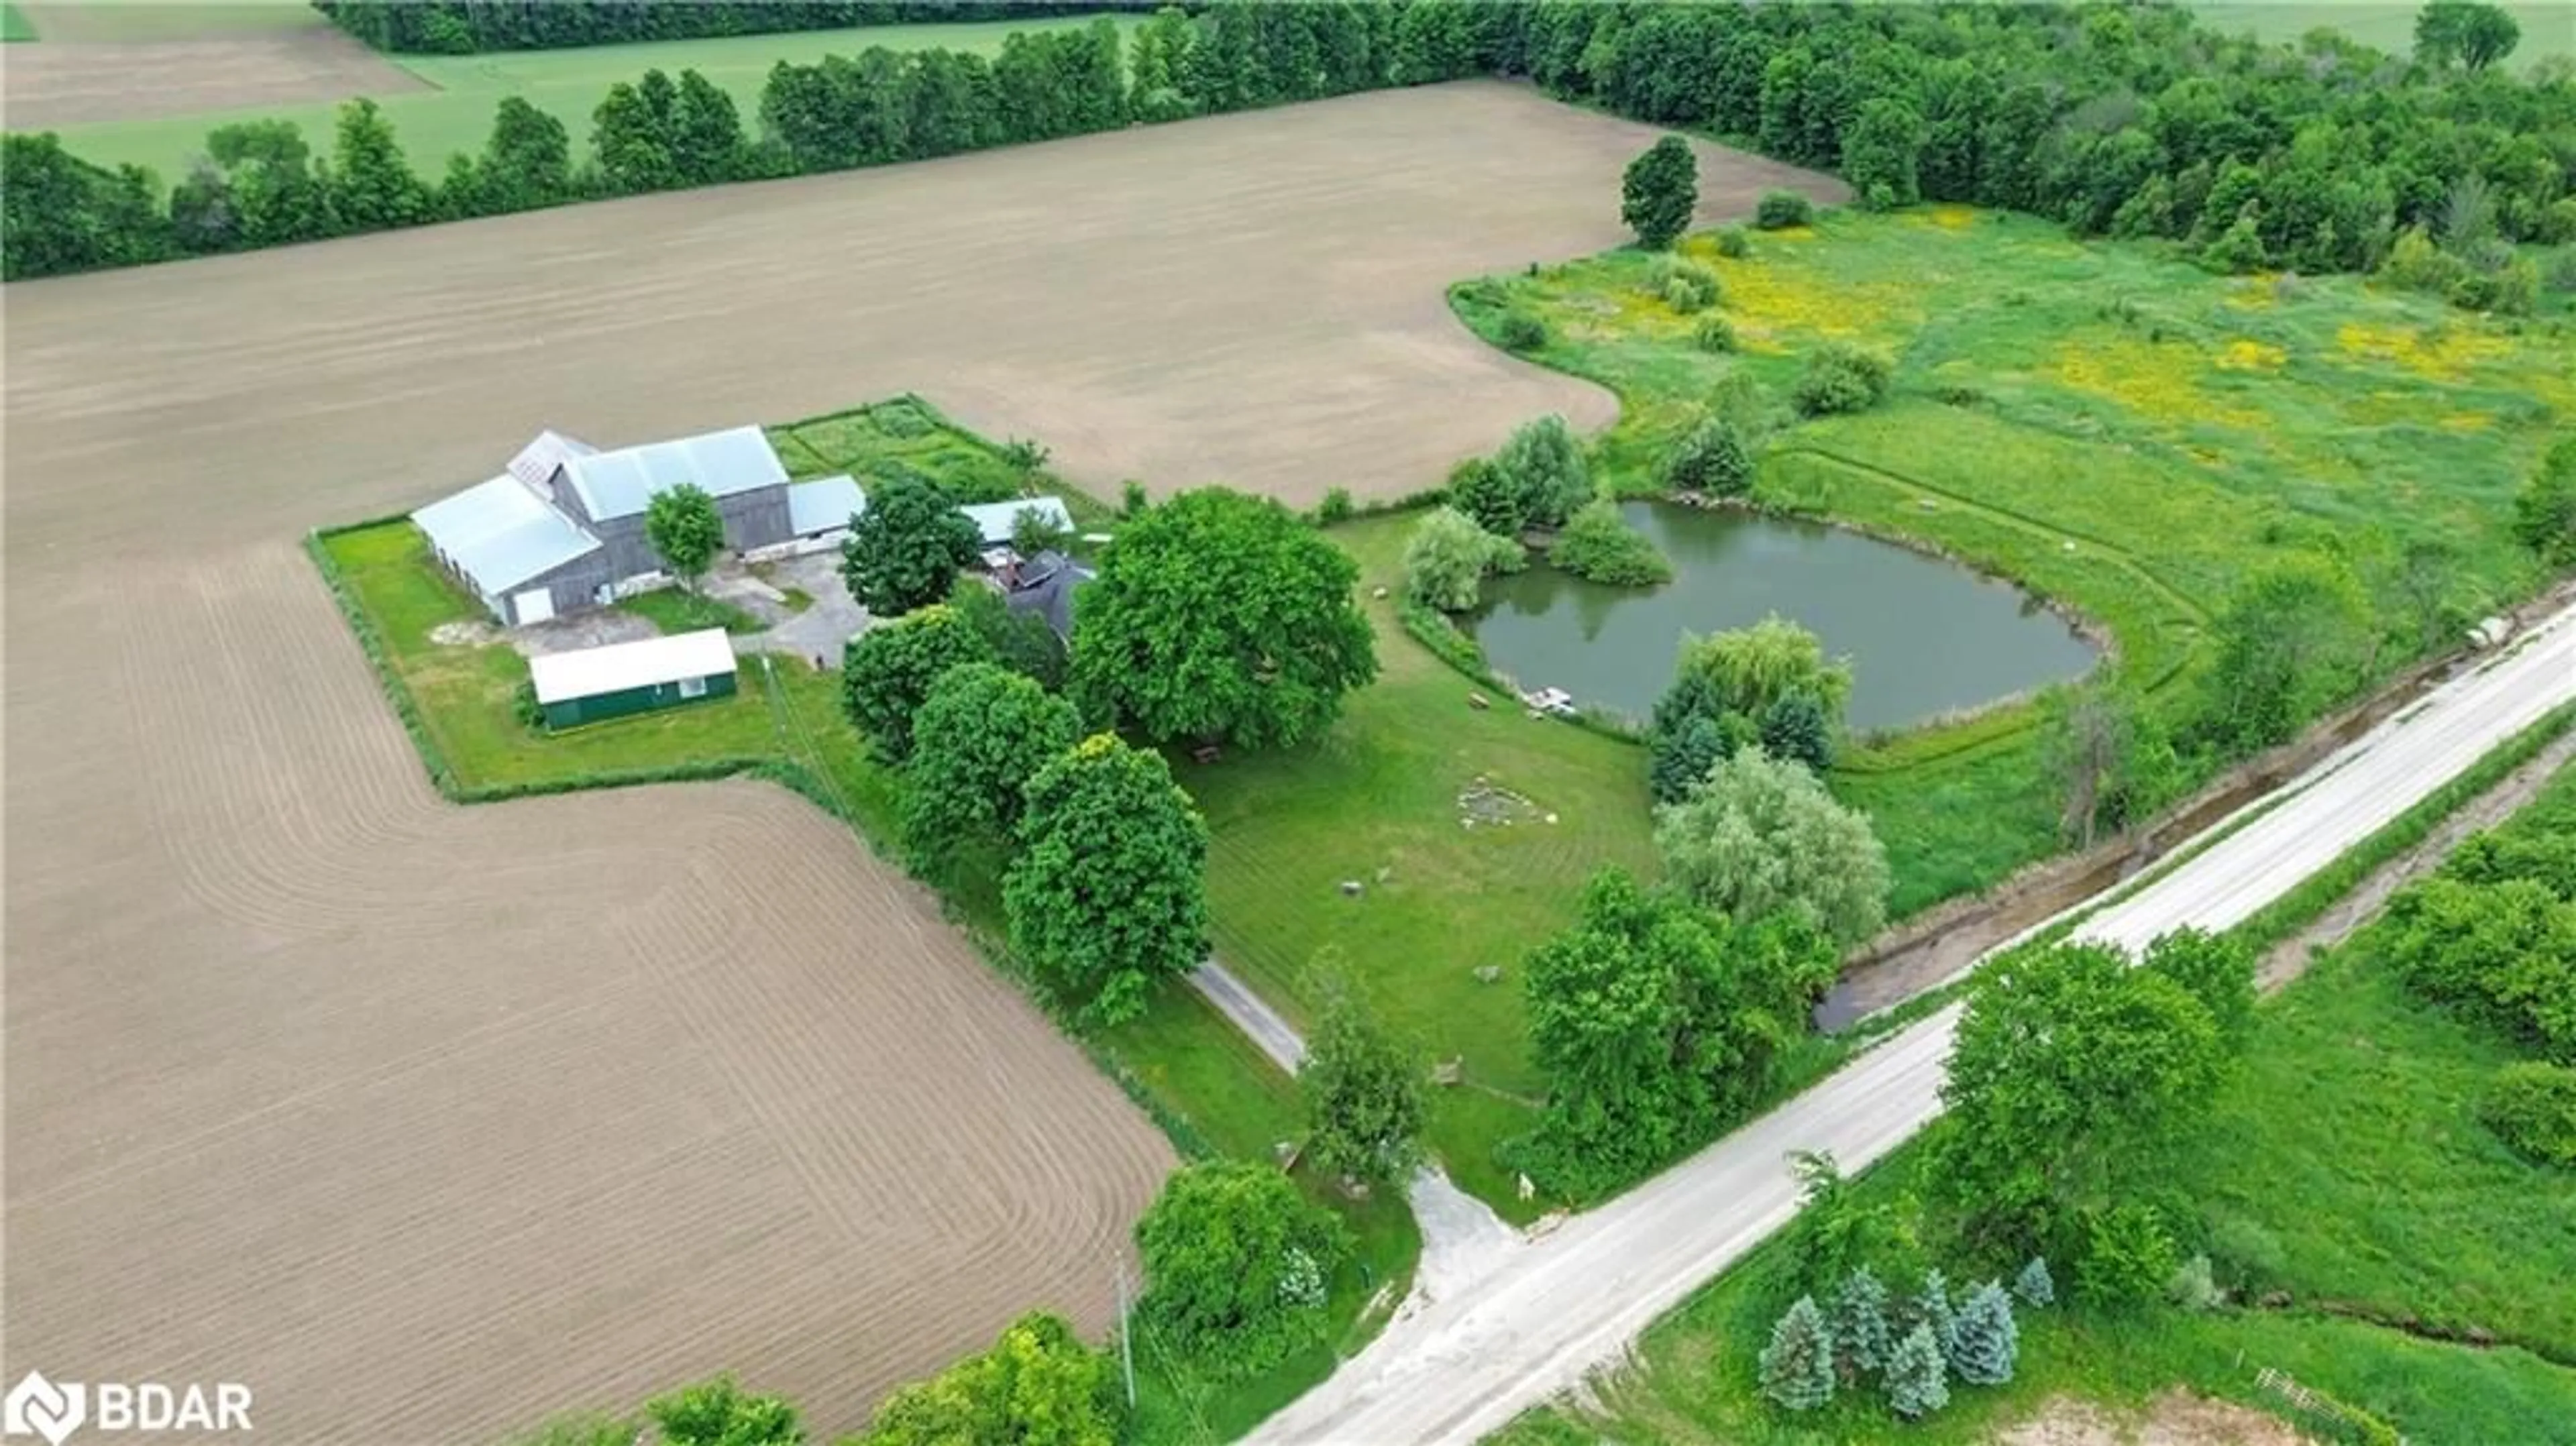 Lakeview for 6511 21/22 Sideroad Nottawasaga, Stayner Ontario L0M 1S0